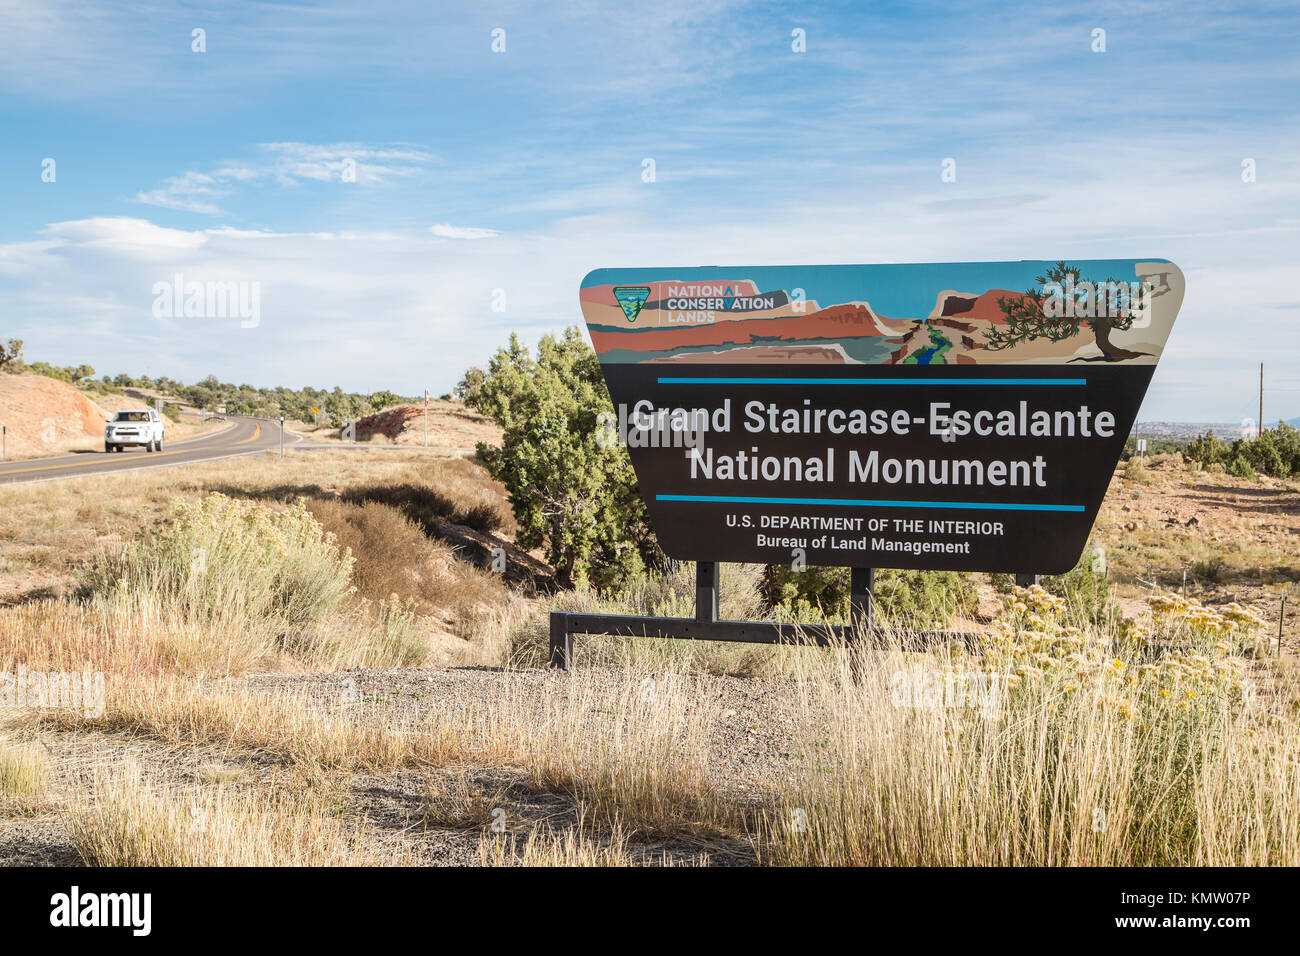 Grand Staircase-Escalante National Monument sign on the side of a highway in Utah Stock Photo